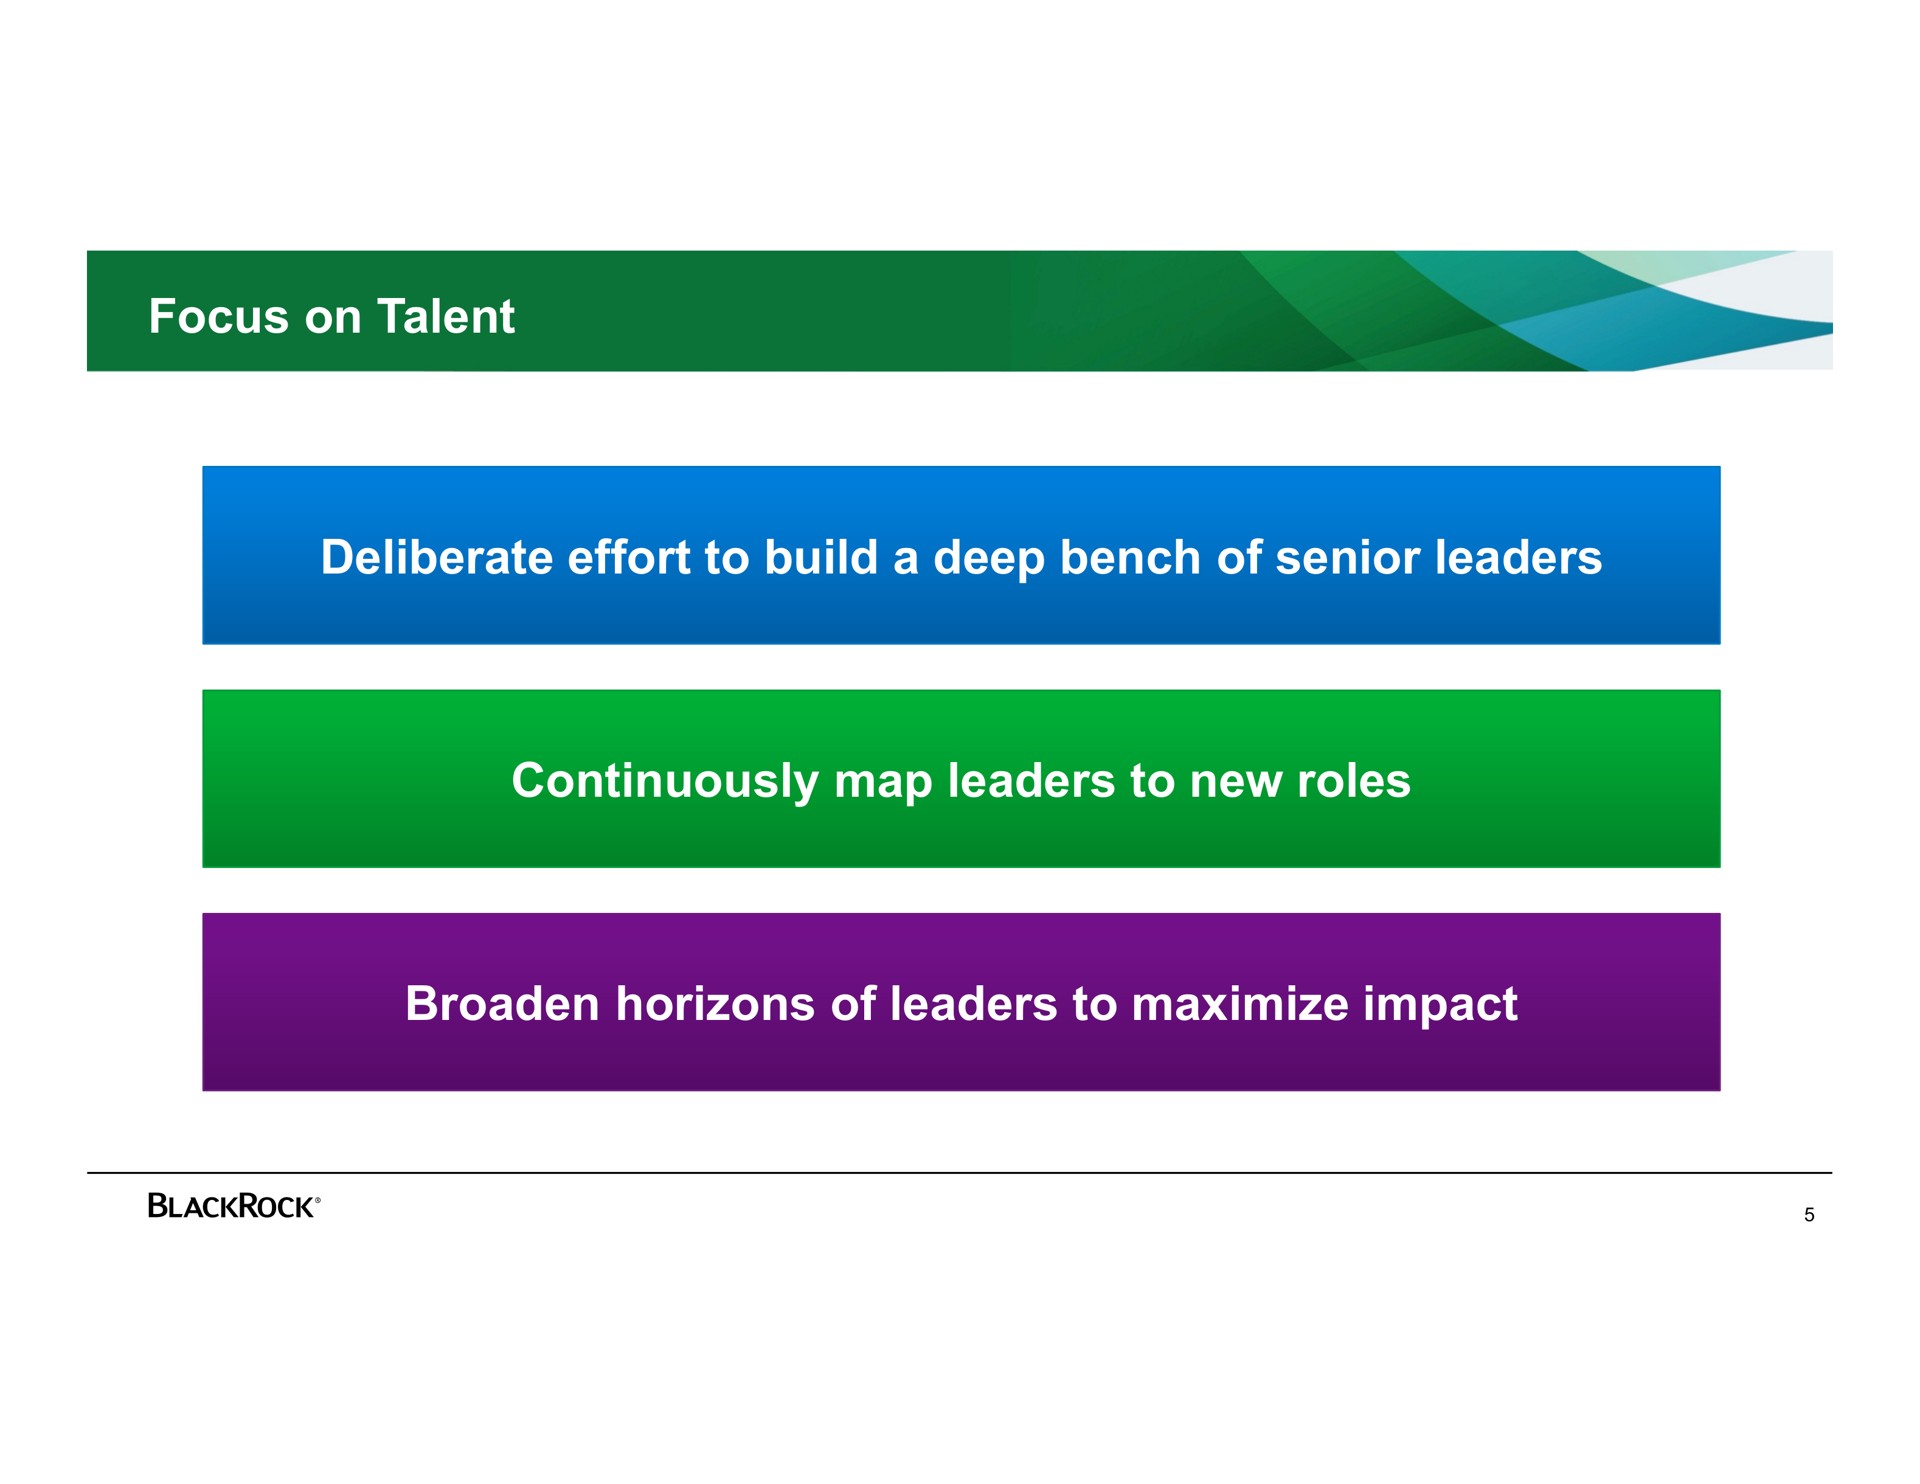 focus on talent deliberate effort to build a deep bench of senior leaders continuously map leaders to new roles broaden horizons of leaders to maximize impact | BlackRock